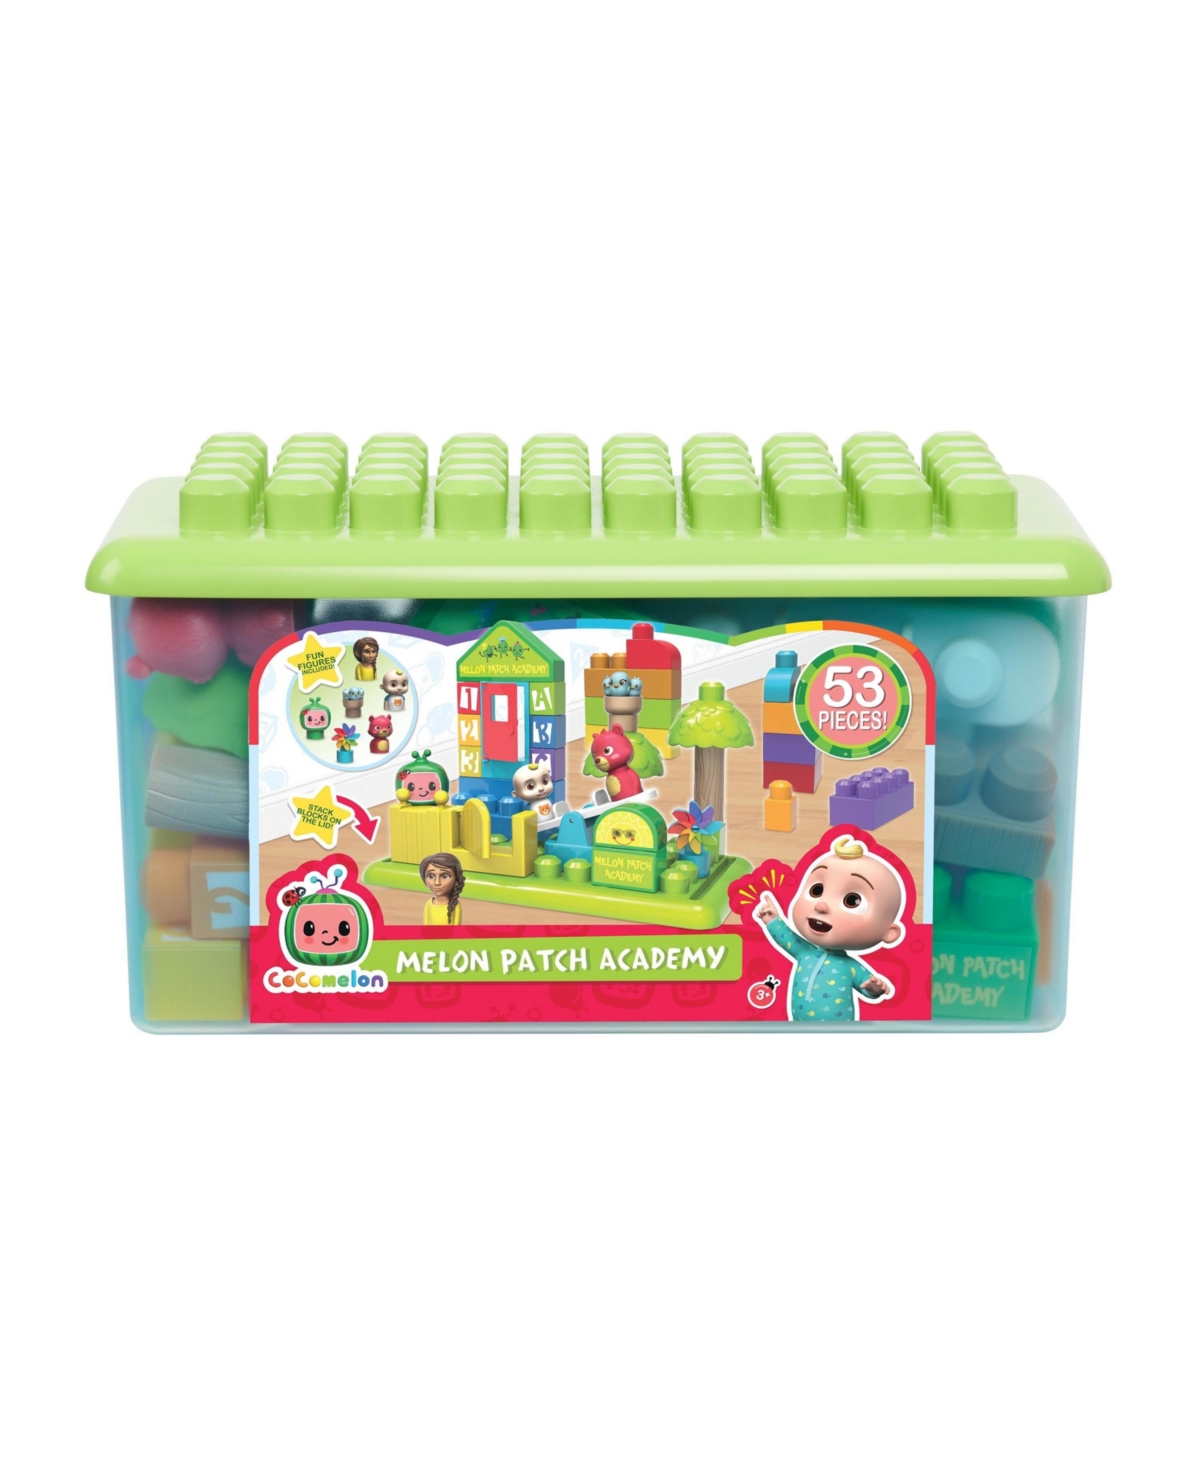 Sesame Street Kids' Cocomelon Melon Patch Academy In Assorted